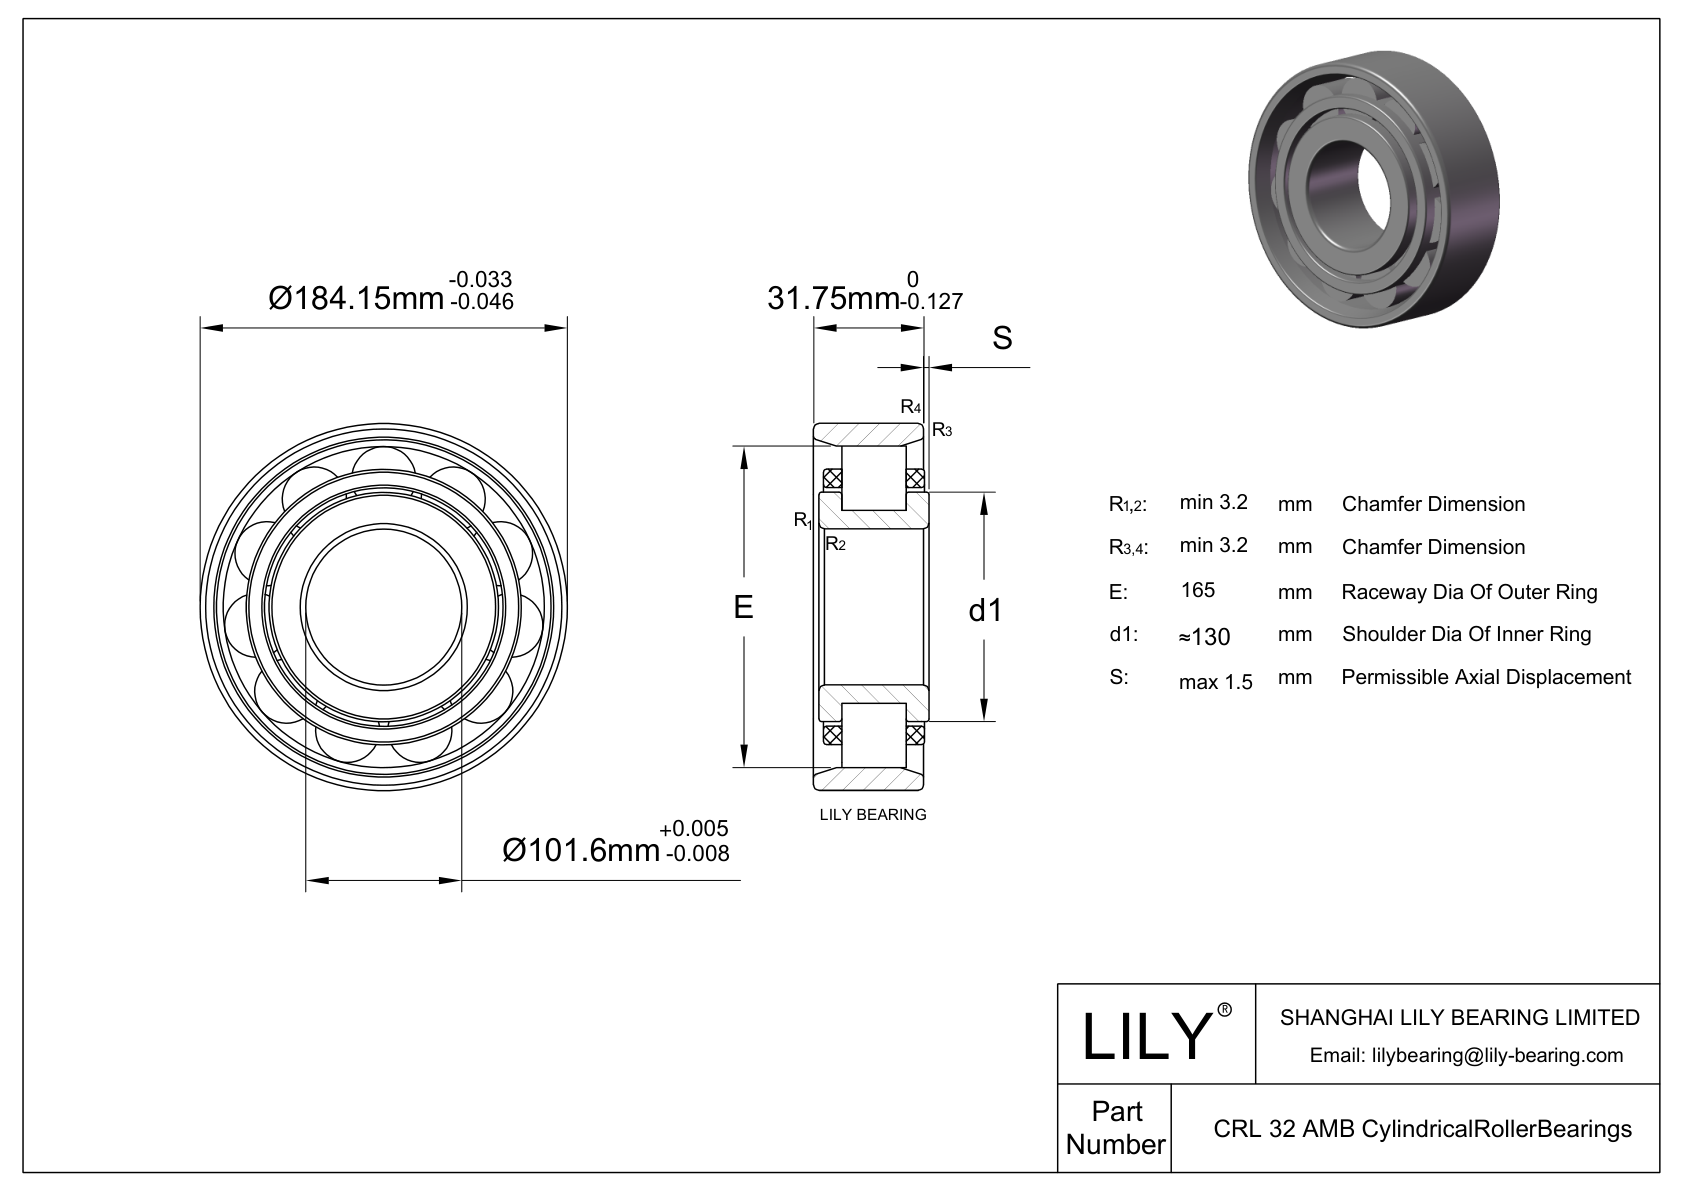 CRL 32 AMB Single Row Cylindrical Roller Bearings With Inner Ring cad drawing